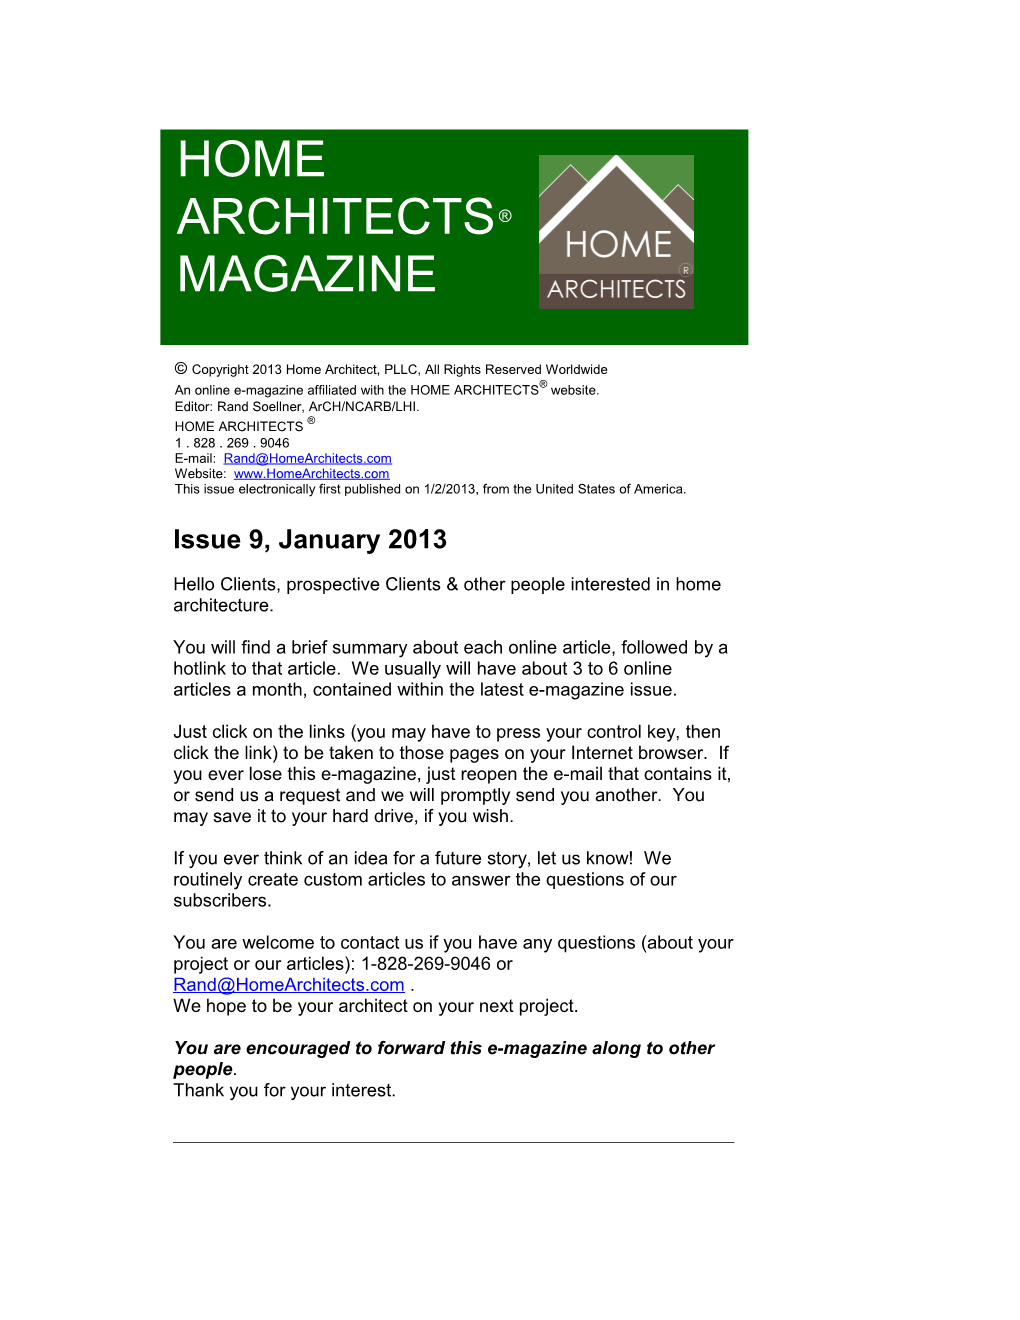 An Online E-Magazine Affiliated with the HOME ARCHITECTS Website